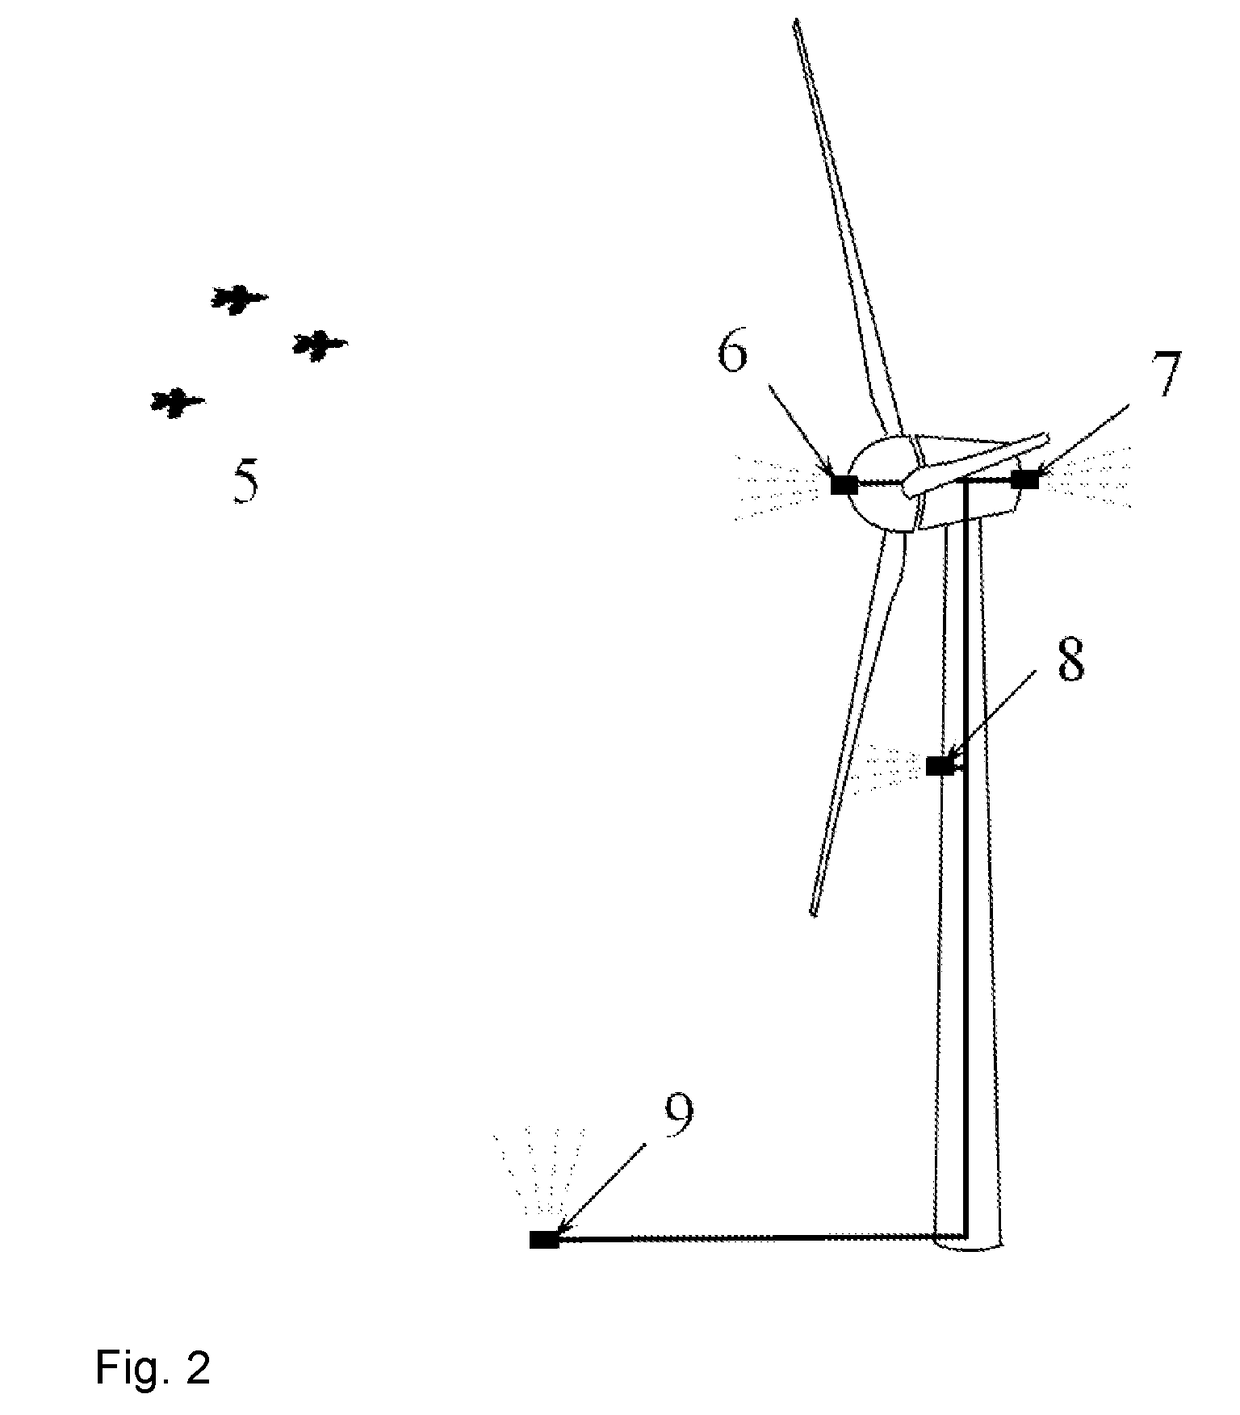 System and method for preventing collisions between wind turbine blades and flying objects